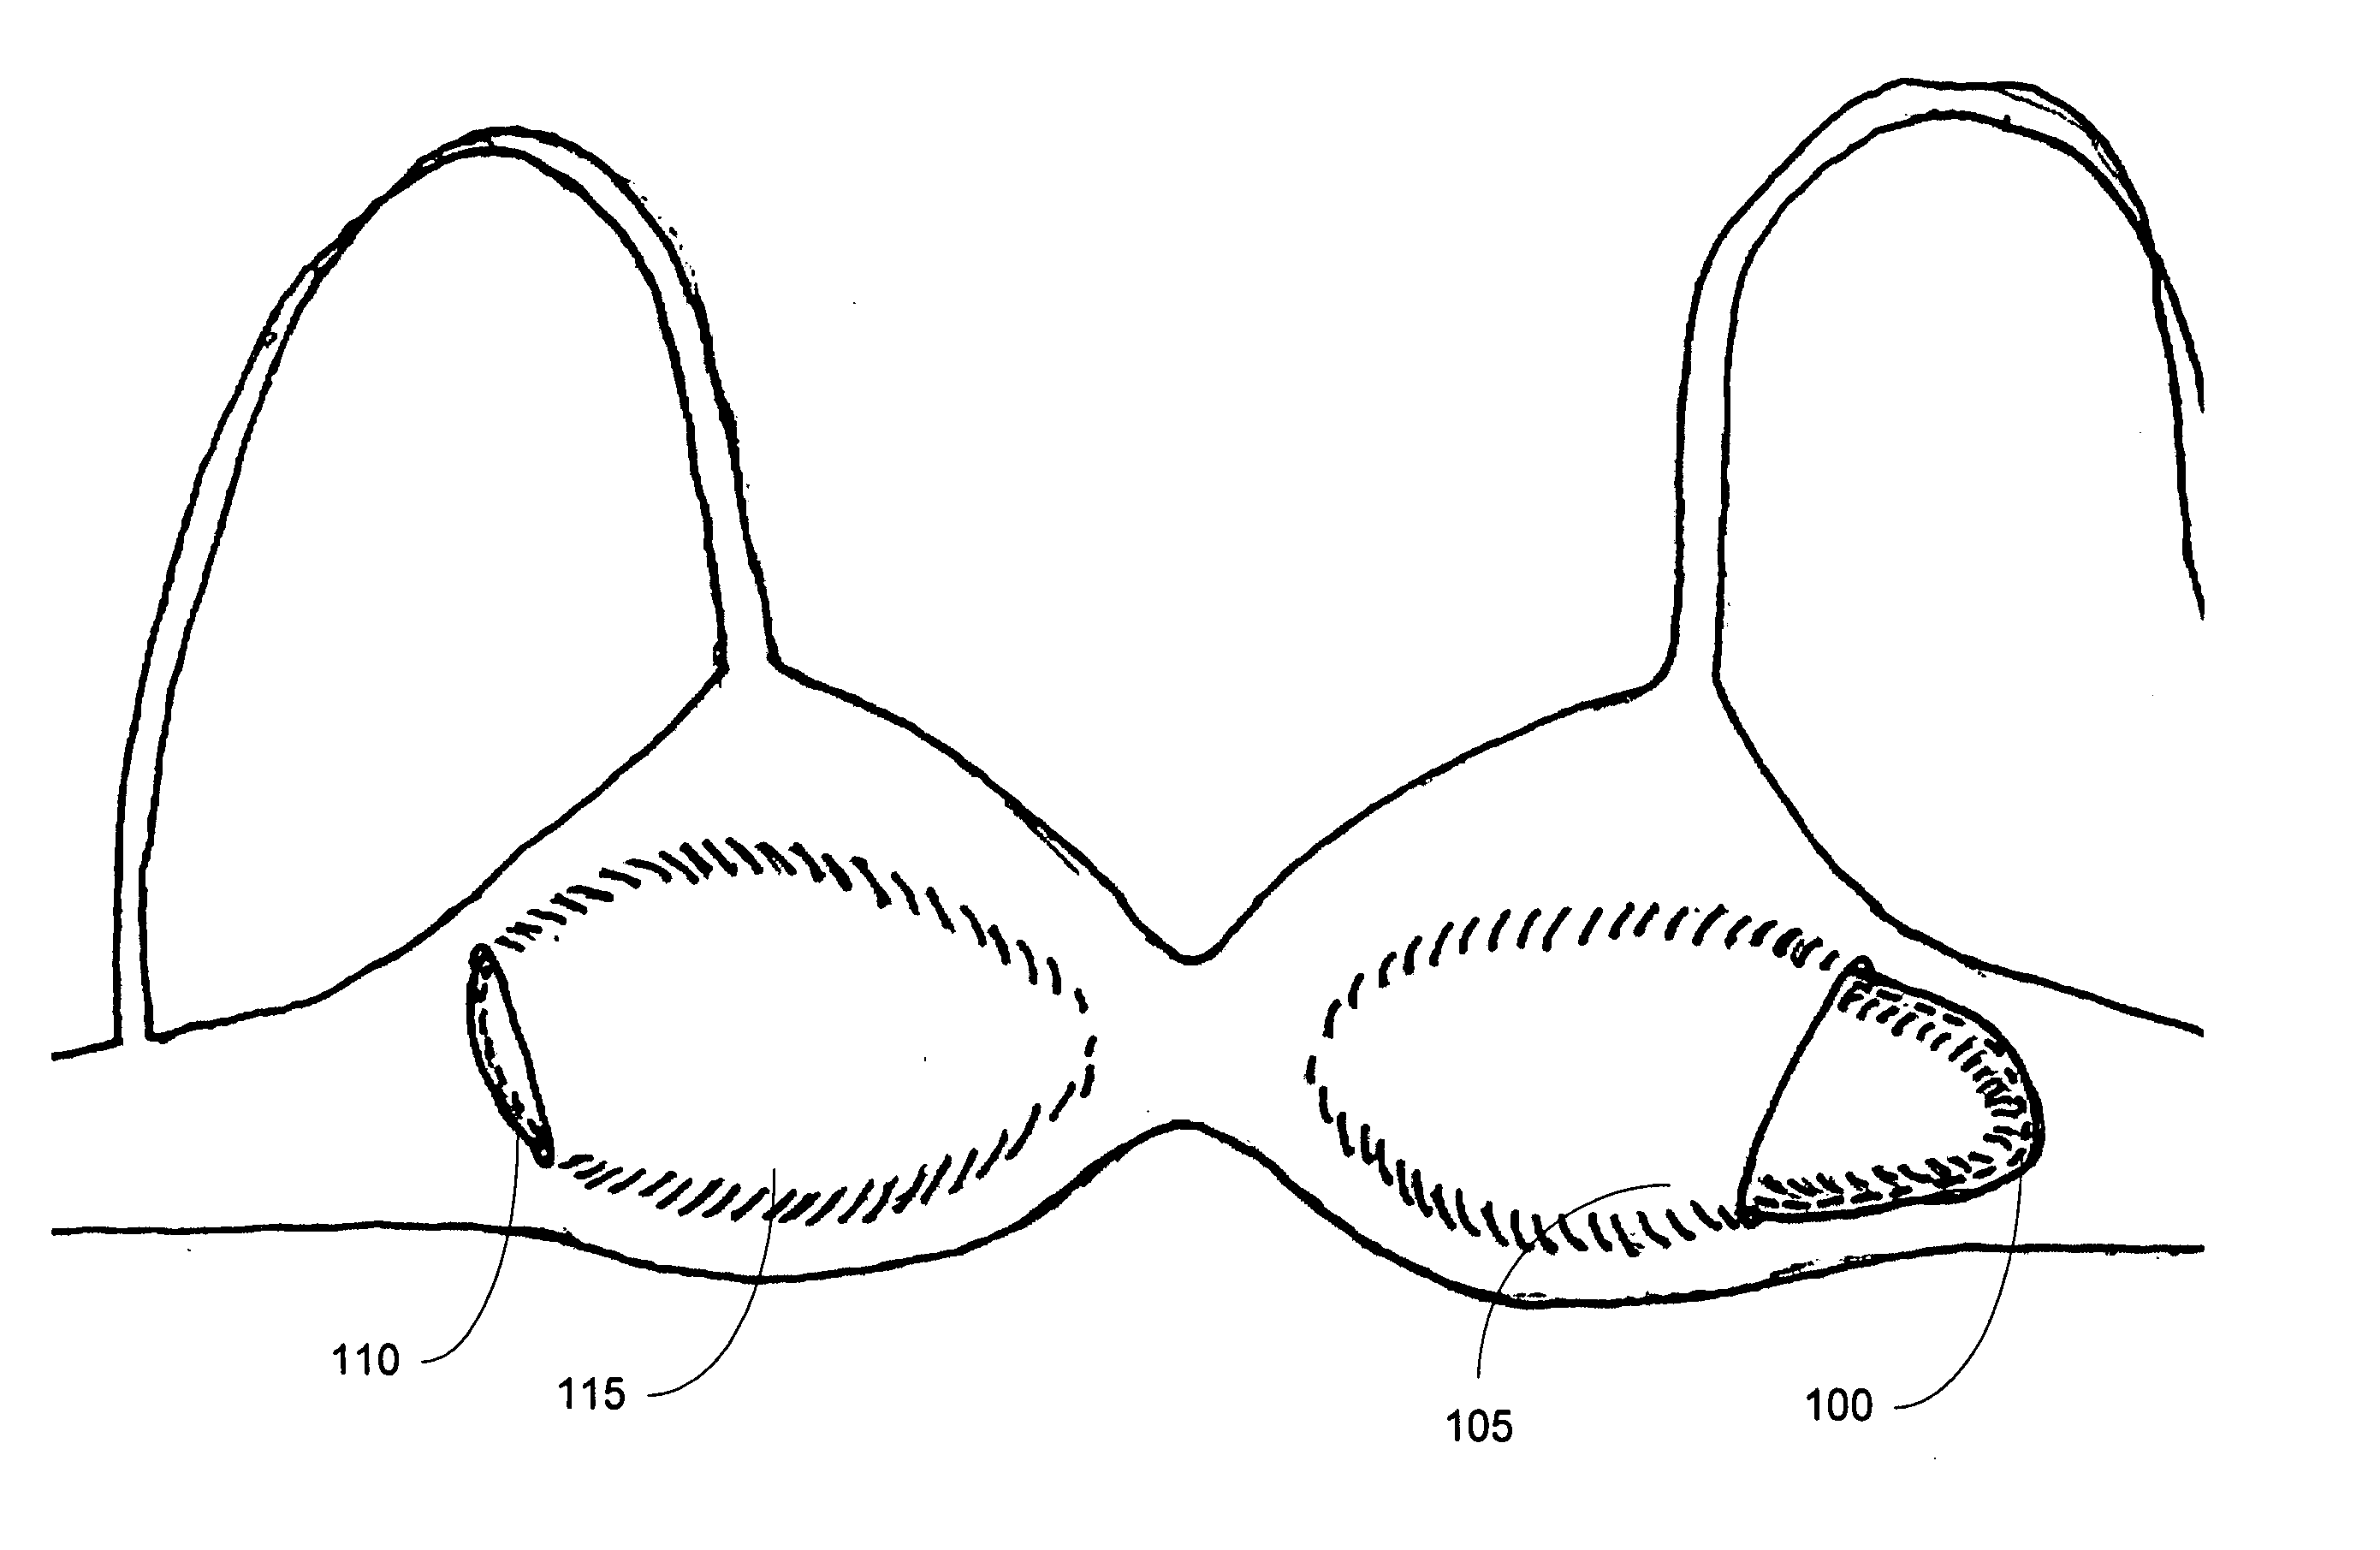 System and method for not-sew manufacturing